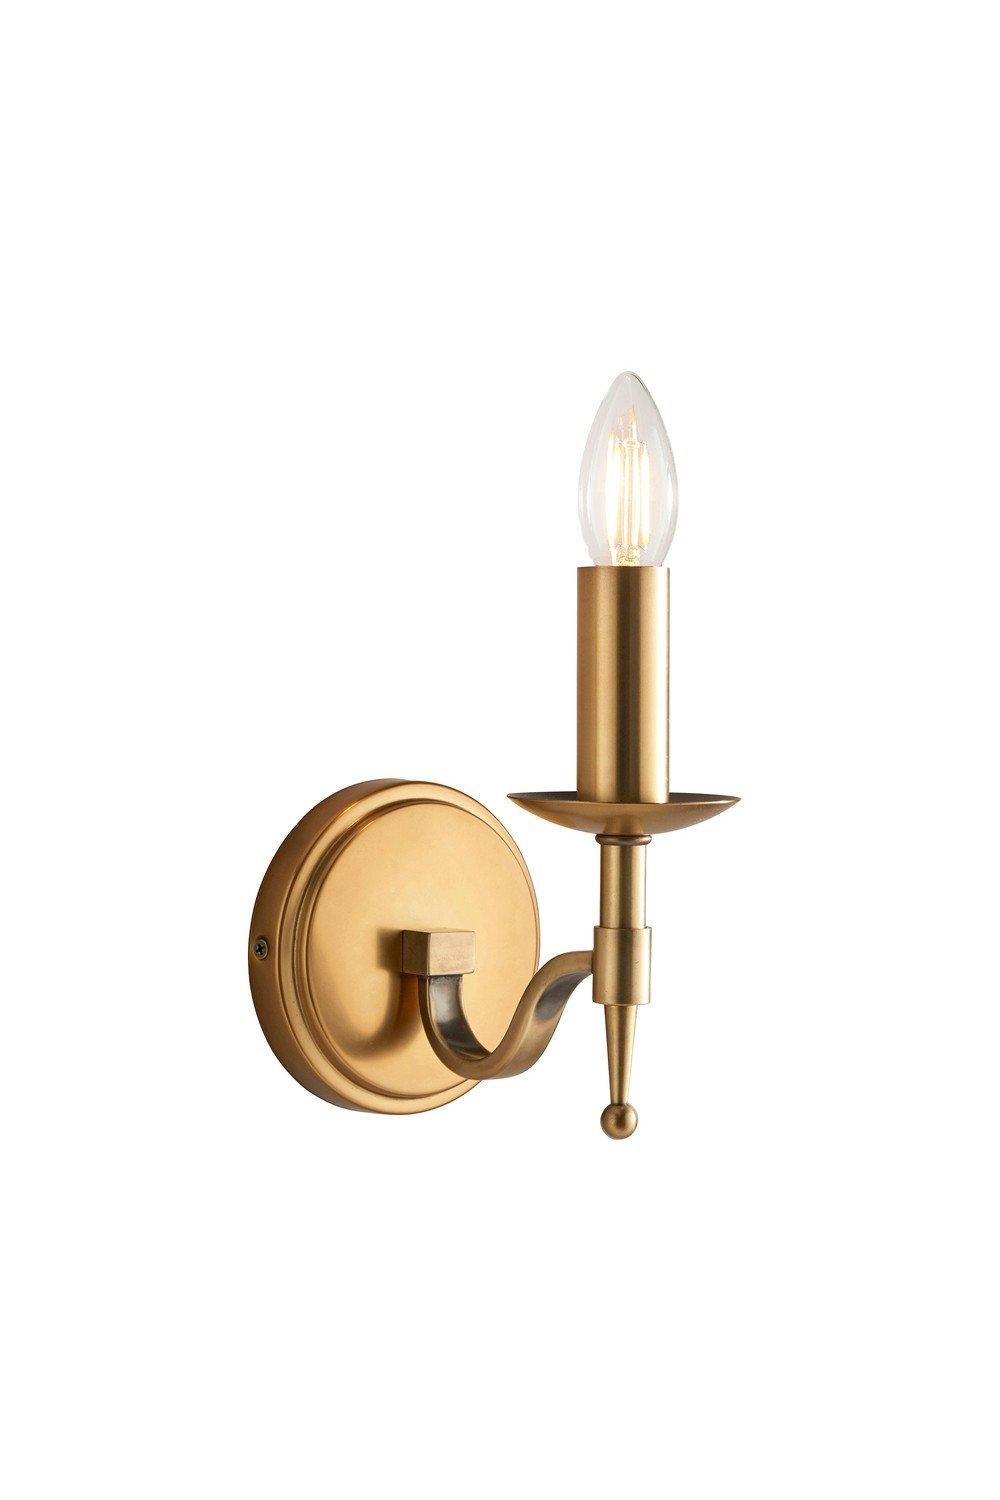 Stanford 1 Light Indoor Candle Wall Light Antique Brass E14